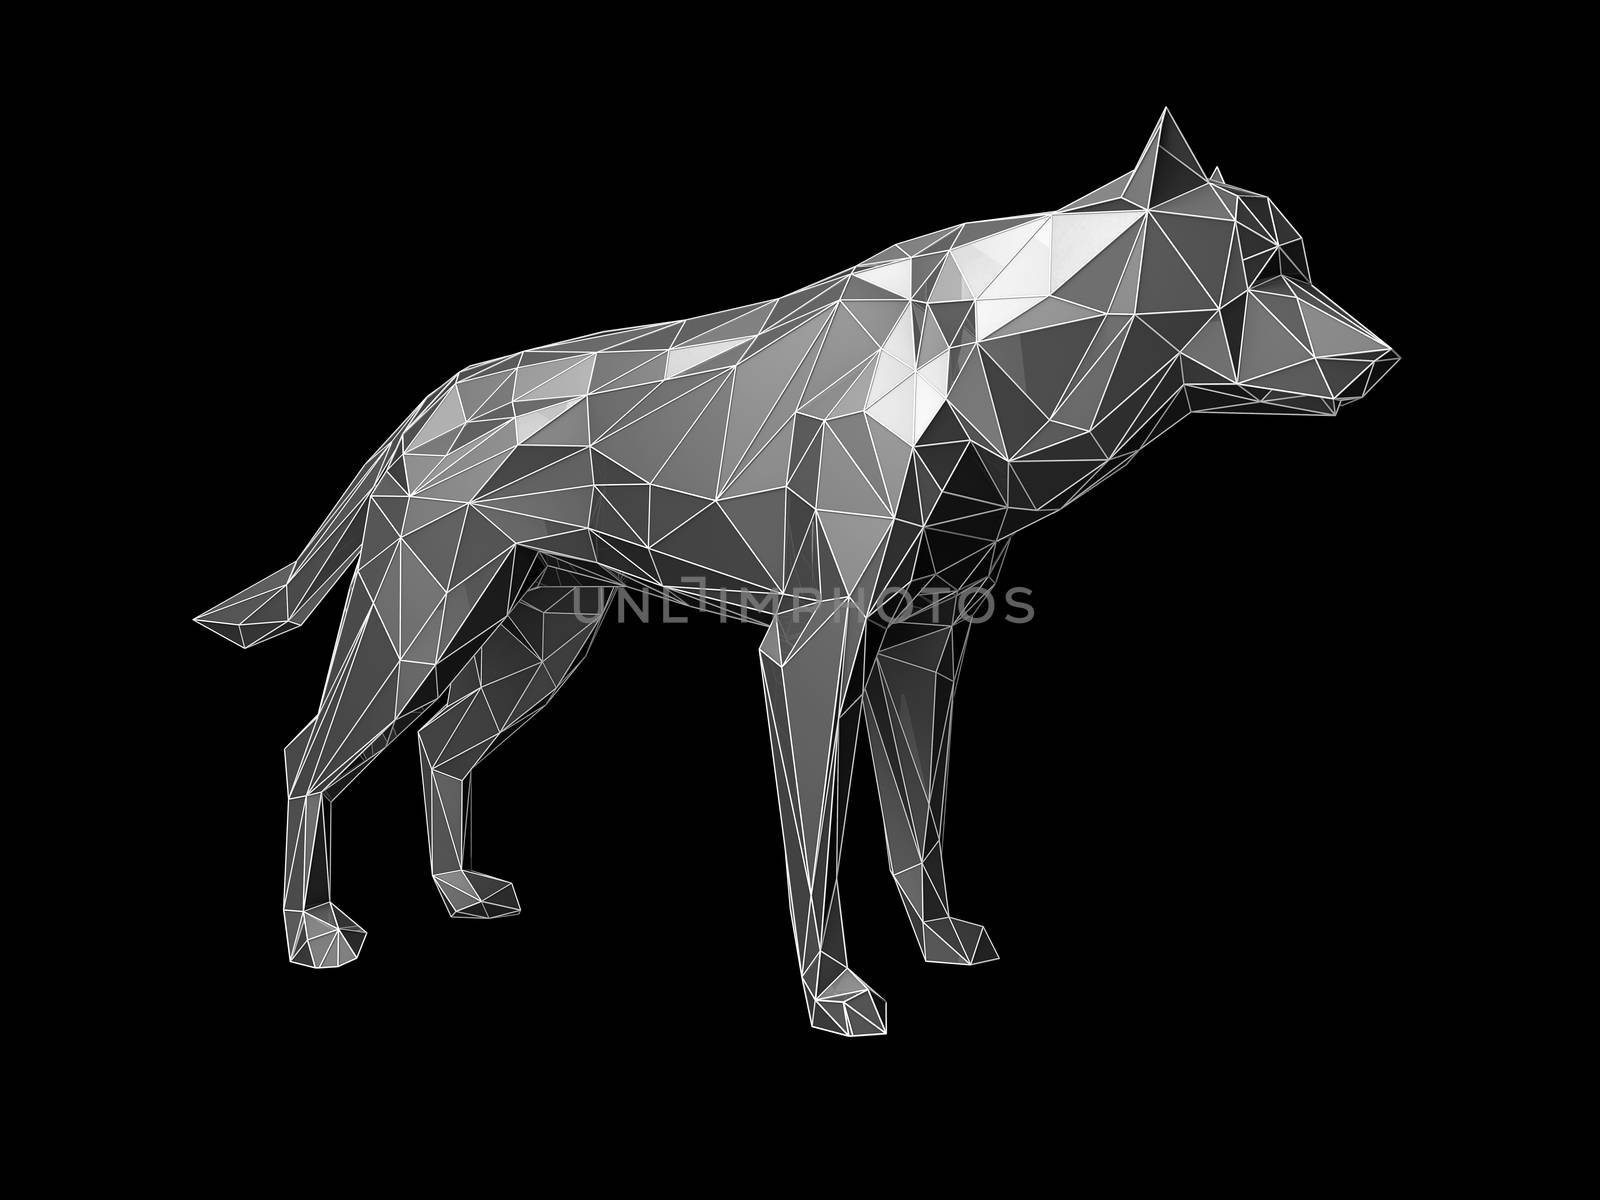 Low poly wolf portrait. Abstract polygonal 3d illustration. by tussik